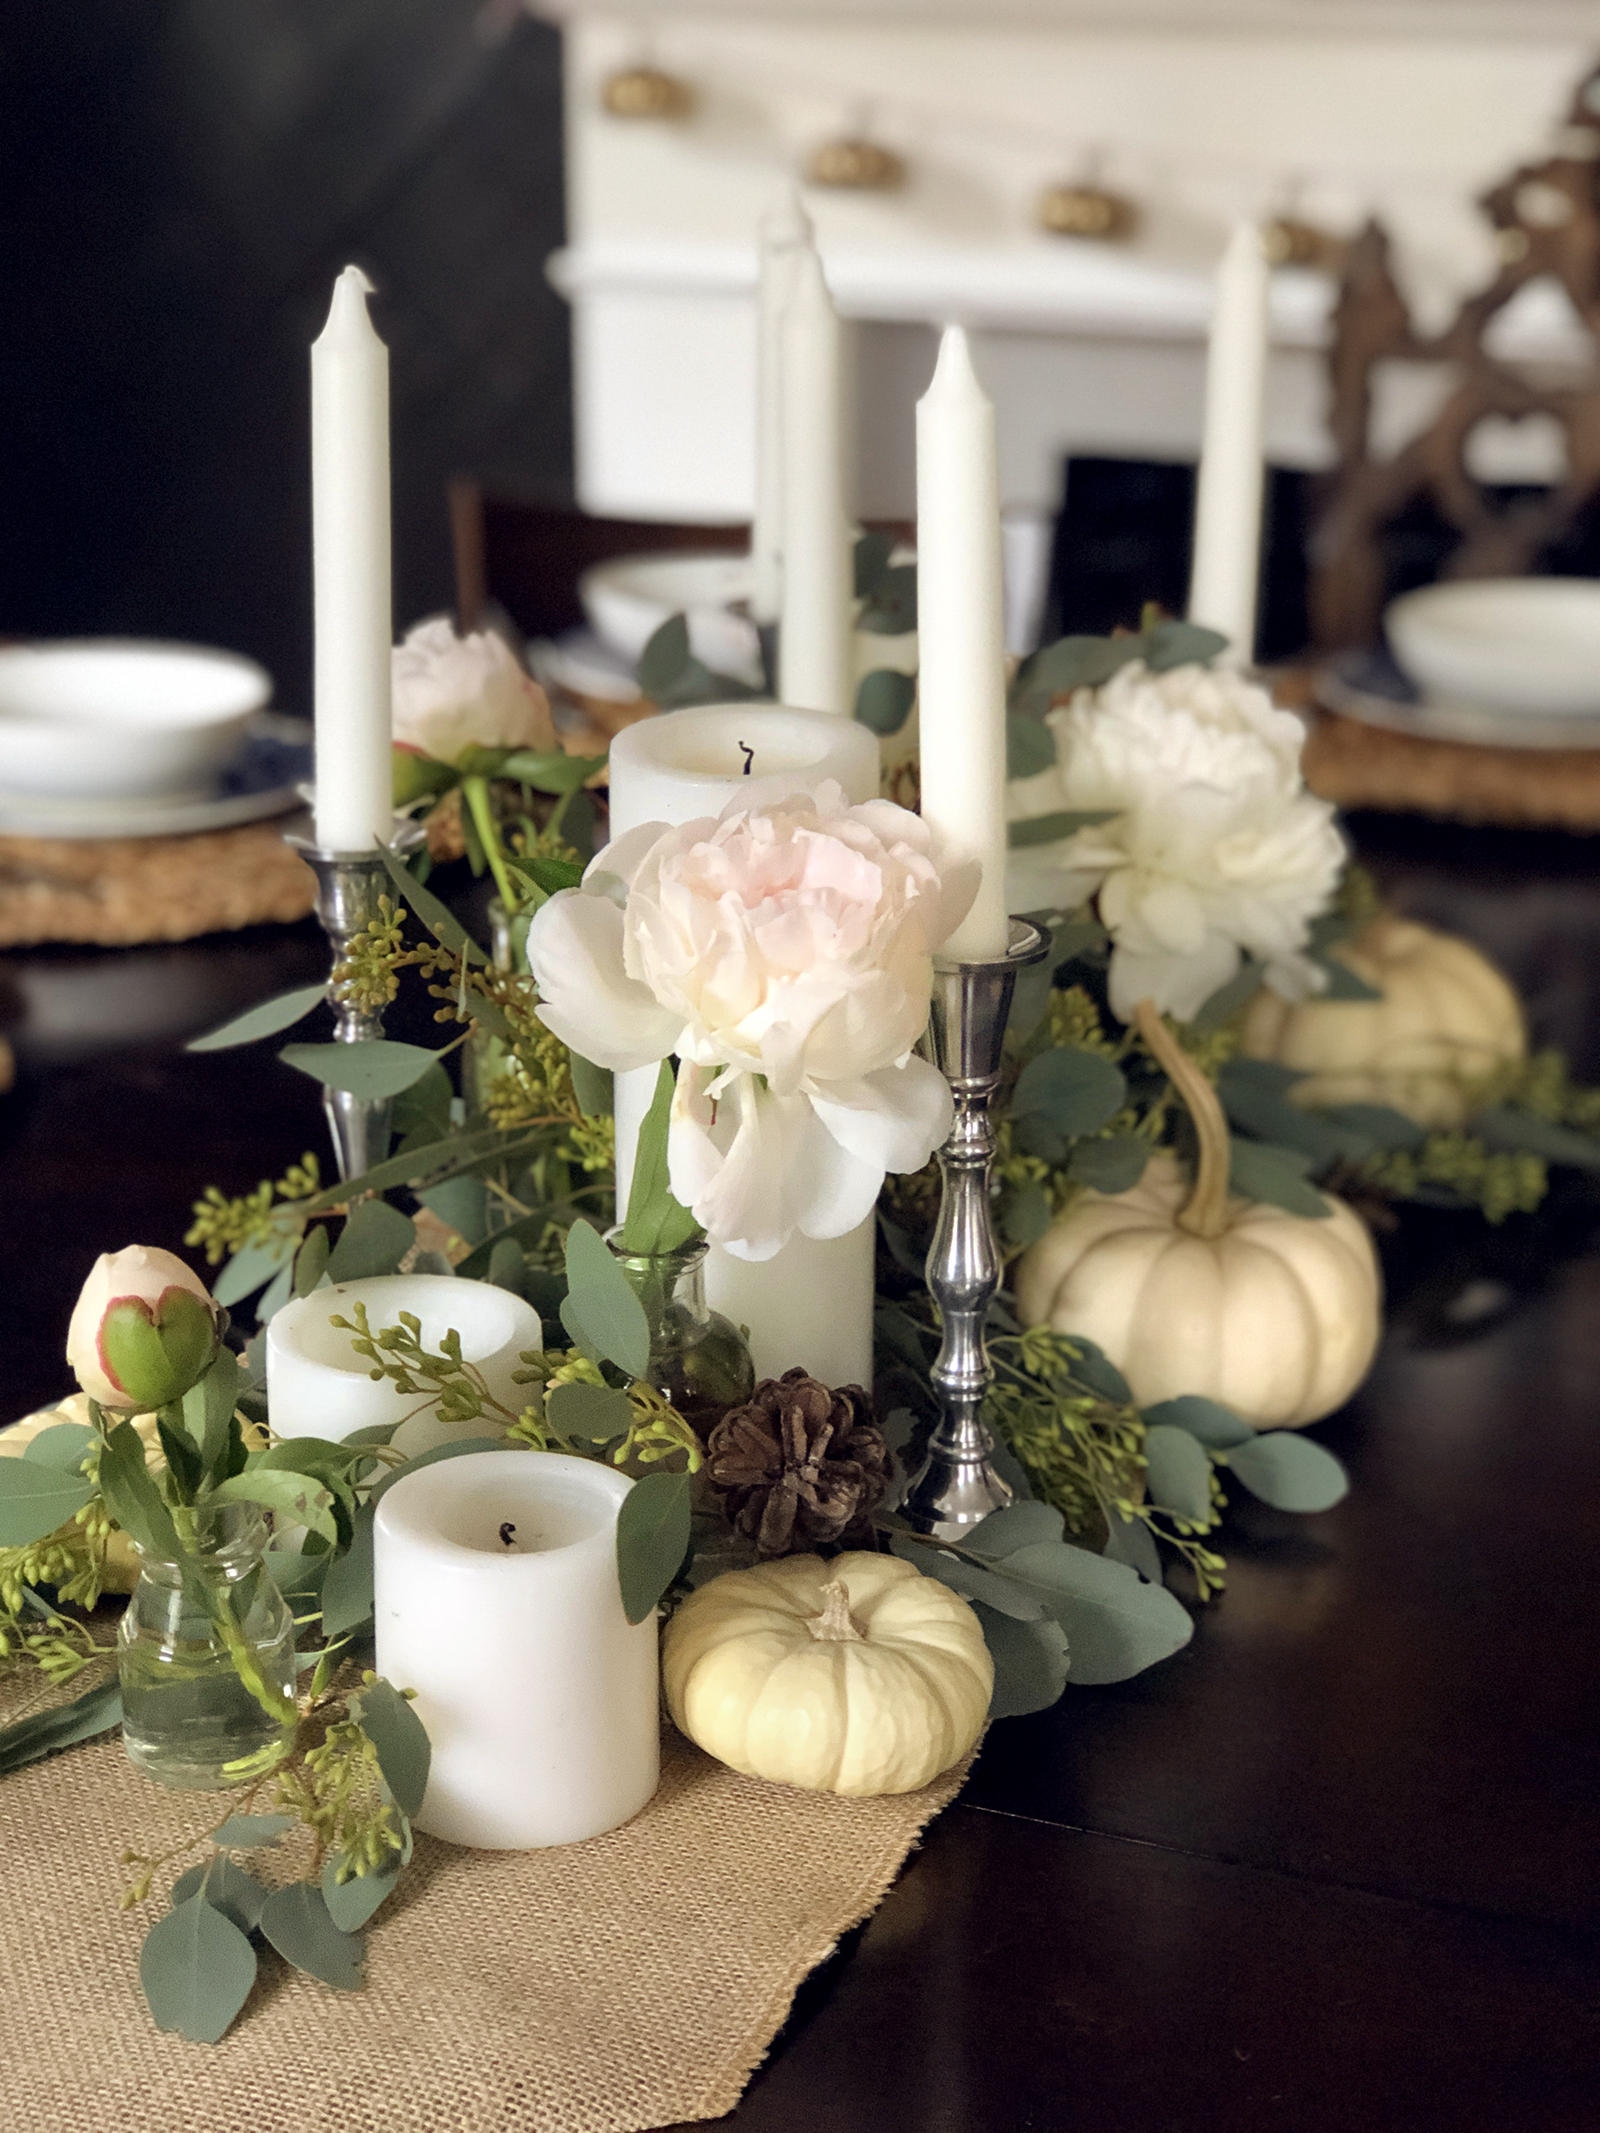 The holidays are right around the corner! Get inspired by my real Thanksgiving centerpiece ideas that I've actually used in the past. /// By Design Fixation #thanksgiving #centerpiece #ideas #holiday